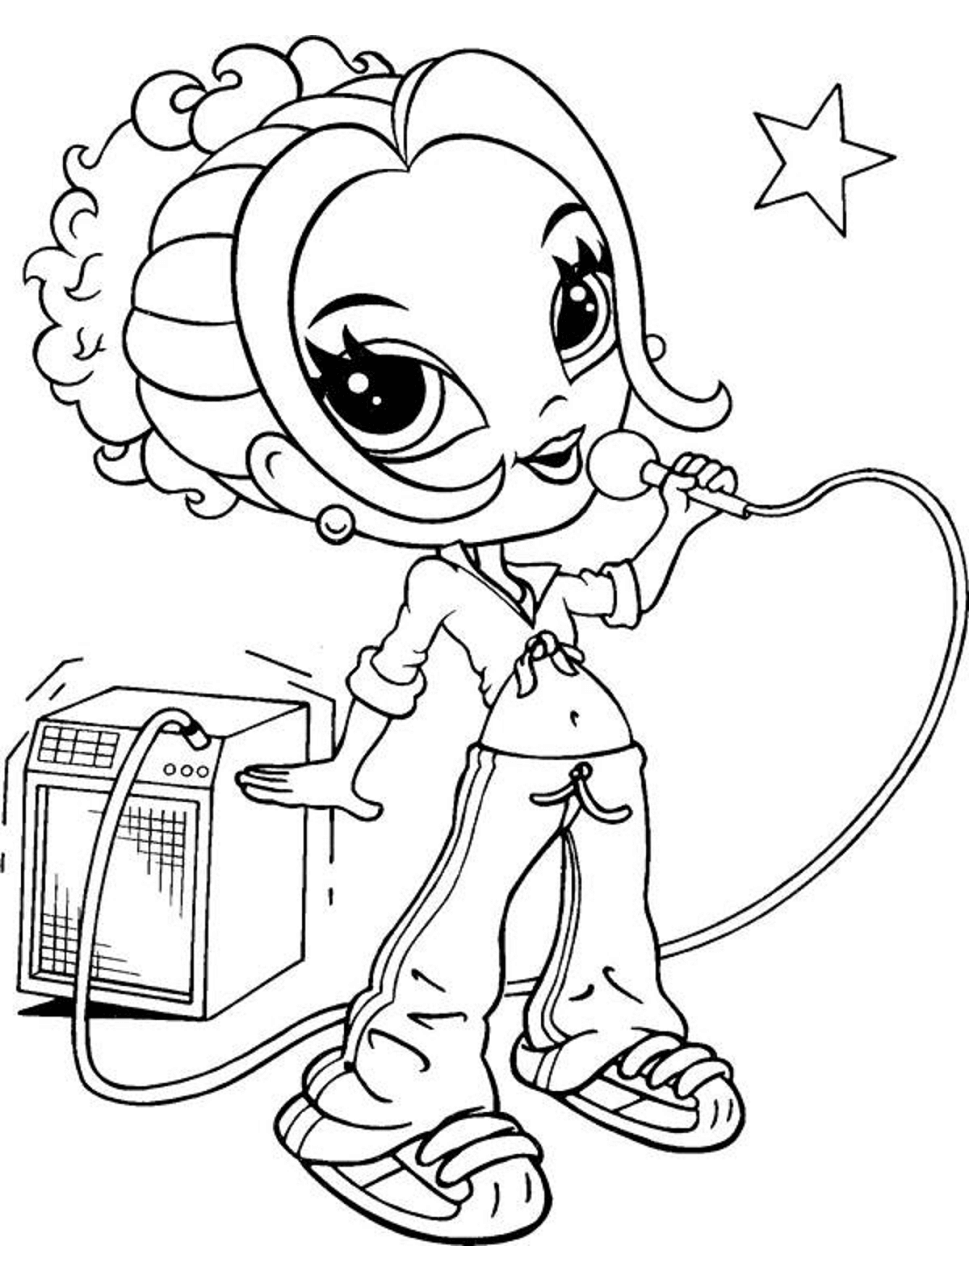 Download Glamour Girl Singing Coloring Page - Free Printable Coloring Pages for Kids